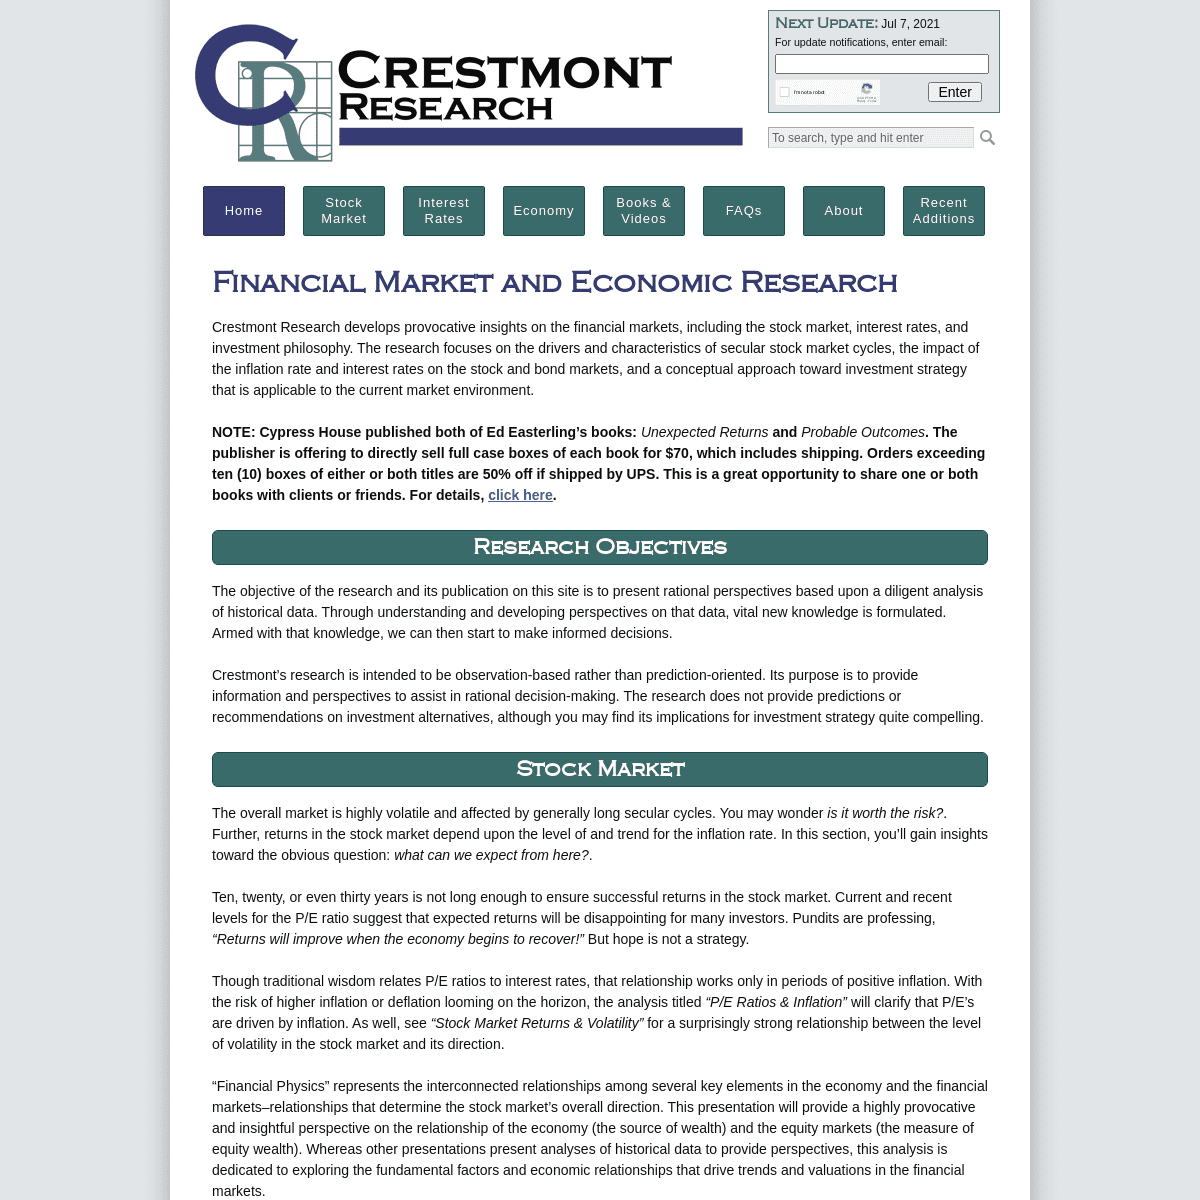 A complete backup of https://crestmontresearch.com